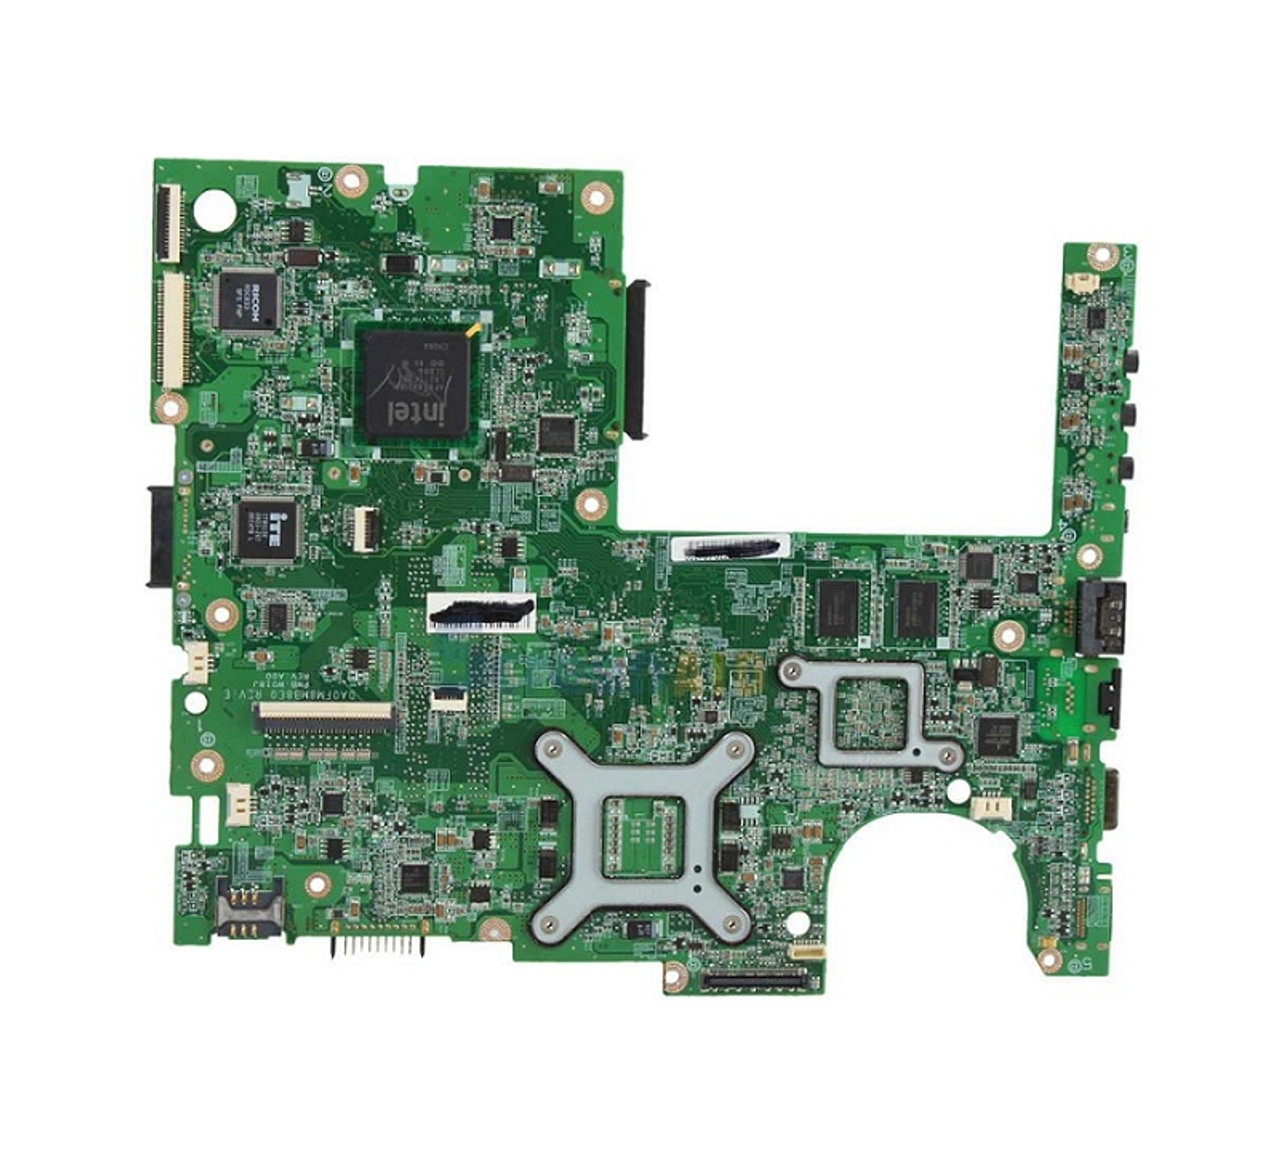 0THVGR - Dell System Board (Motherboard) Core i5 2.2GHz (i5-5200U) with CPU for Inspiron 15 3542 (Refurbished)